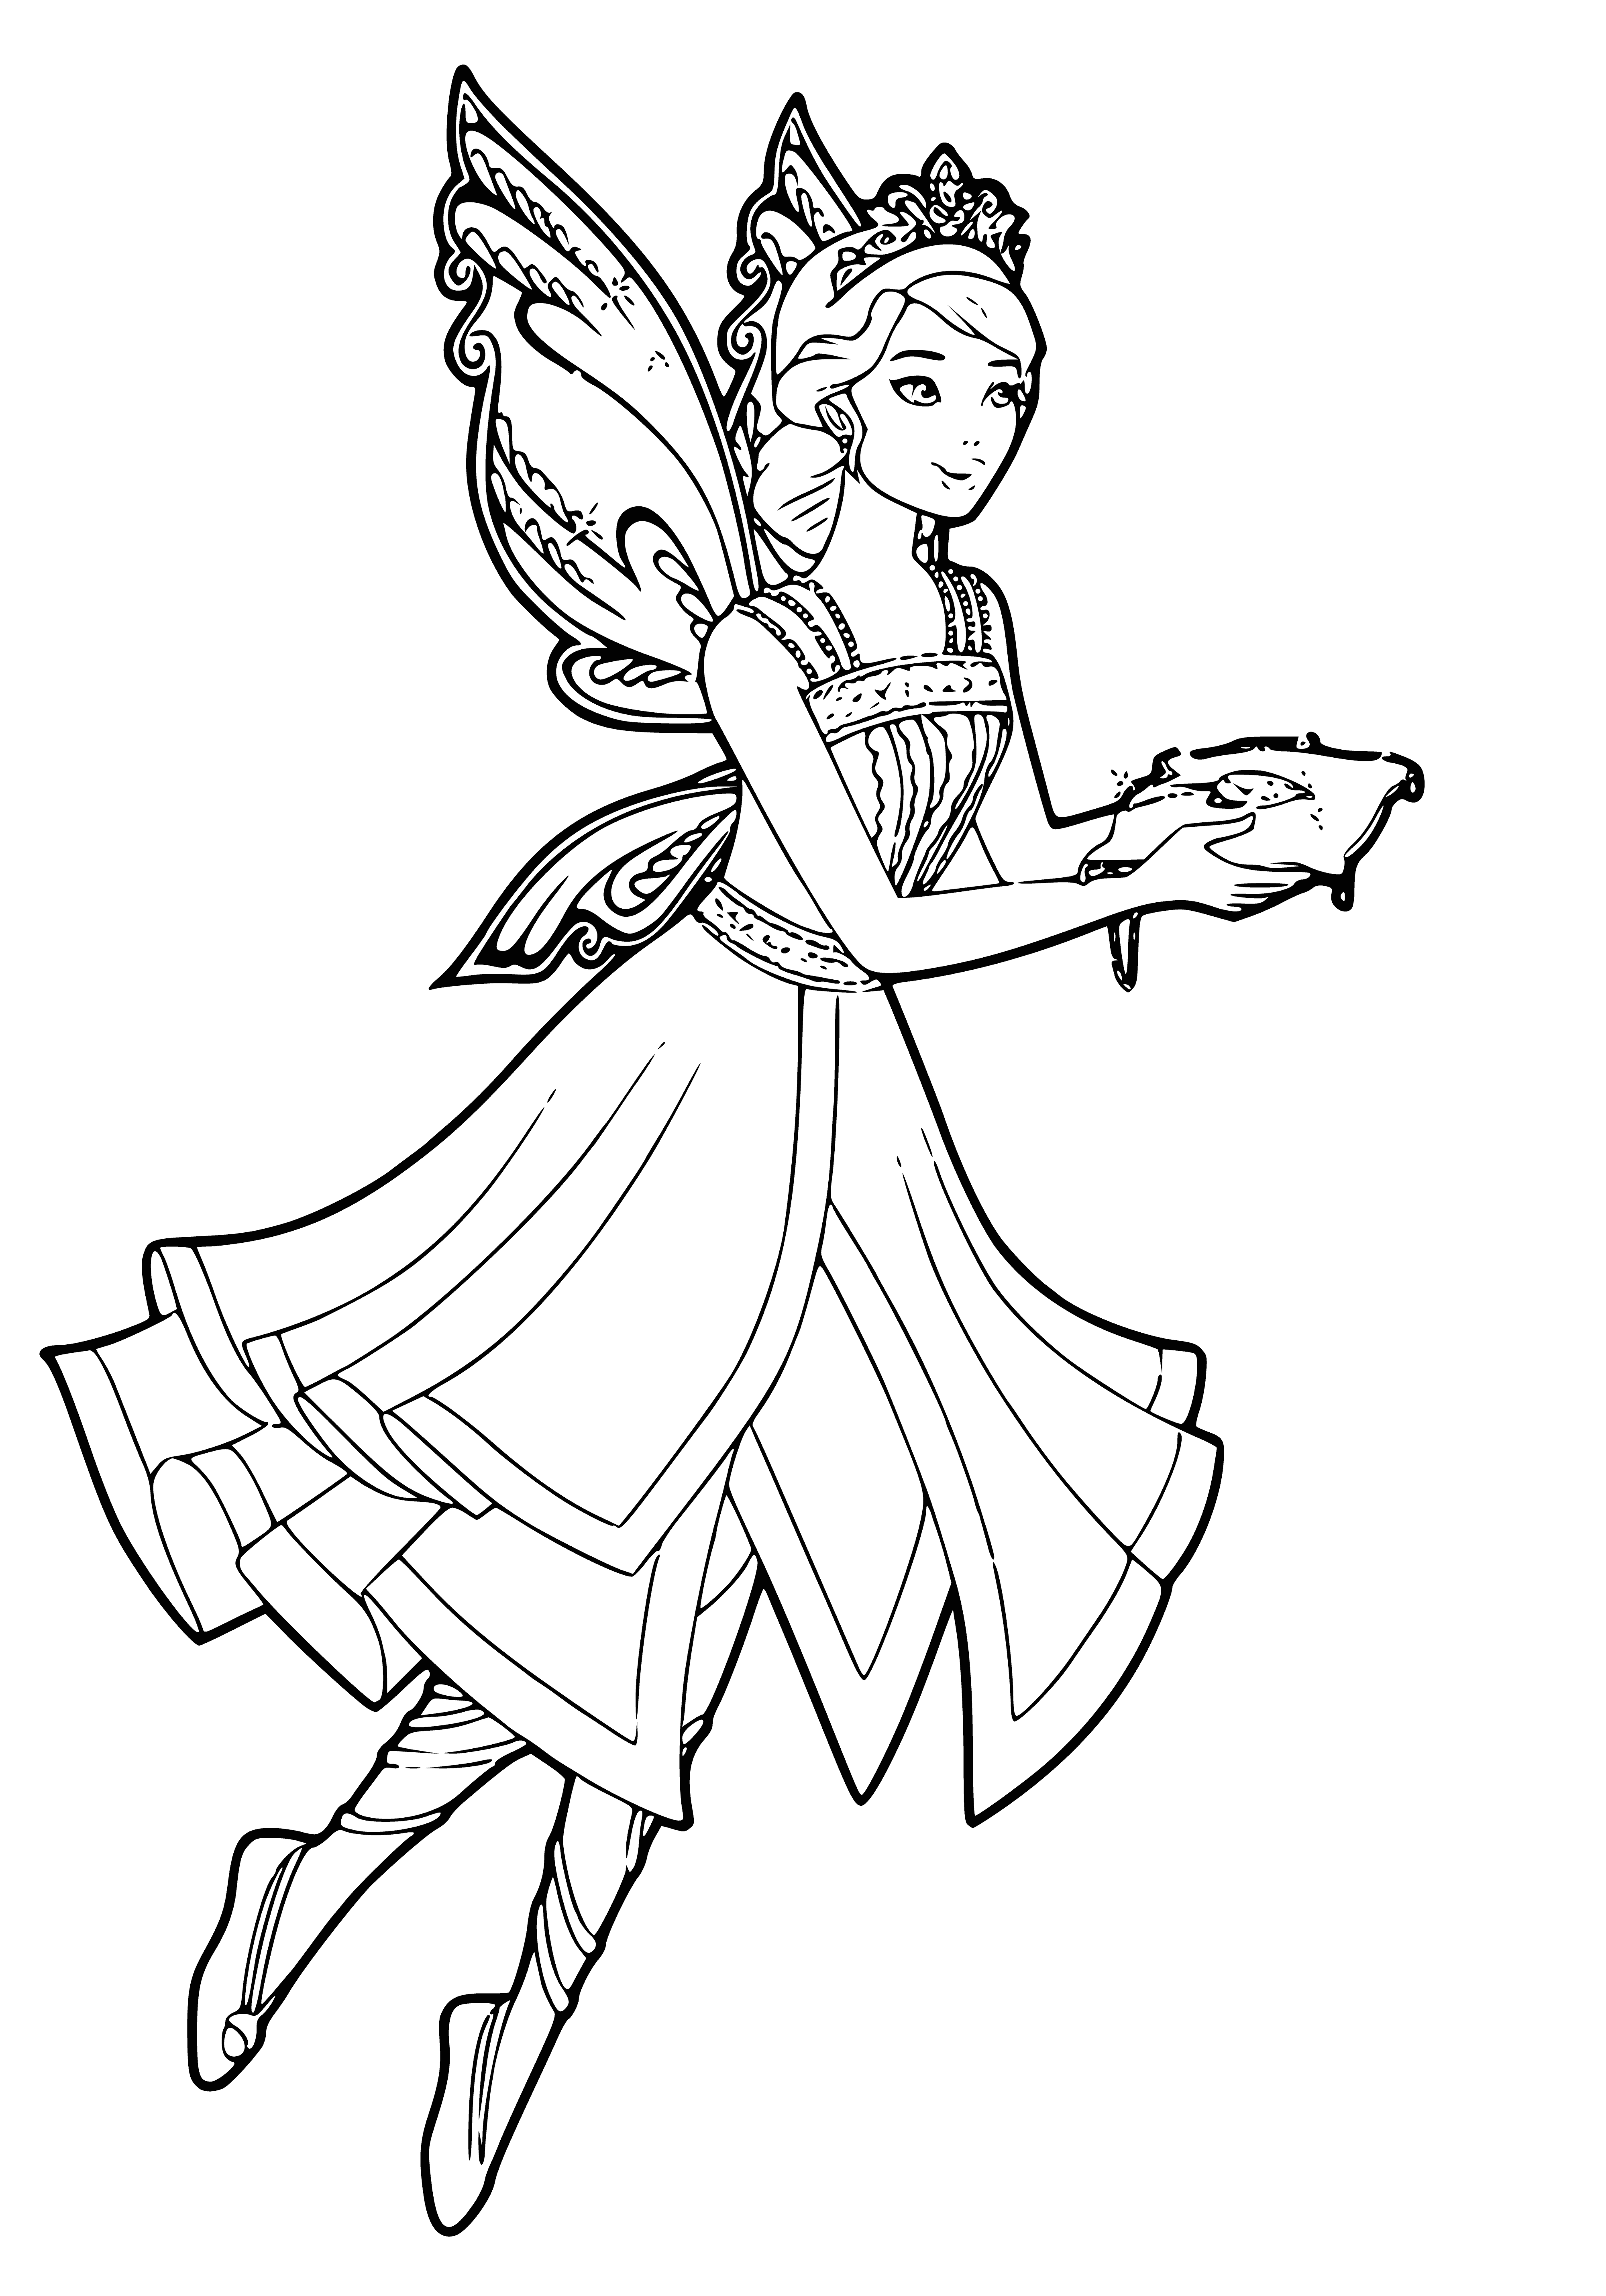 coloring page: Fairy Barbie casts magical spells with her wand in her pretty pink dress and side braid, holding her hand raised in magic. She has blue eyes, wings, and a dazzling charm.